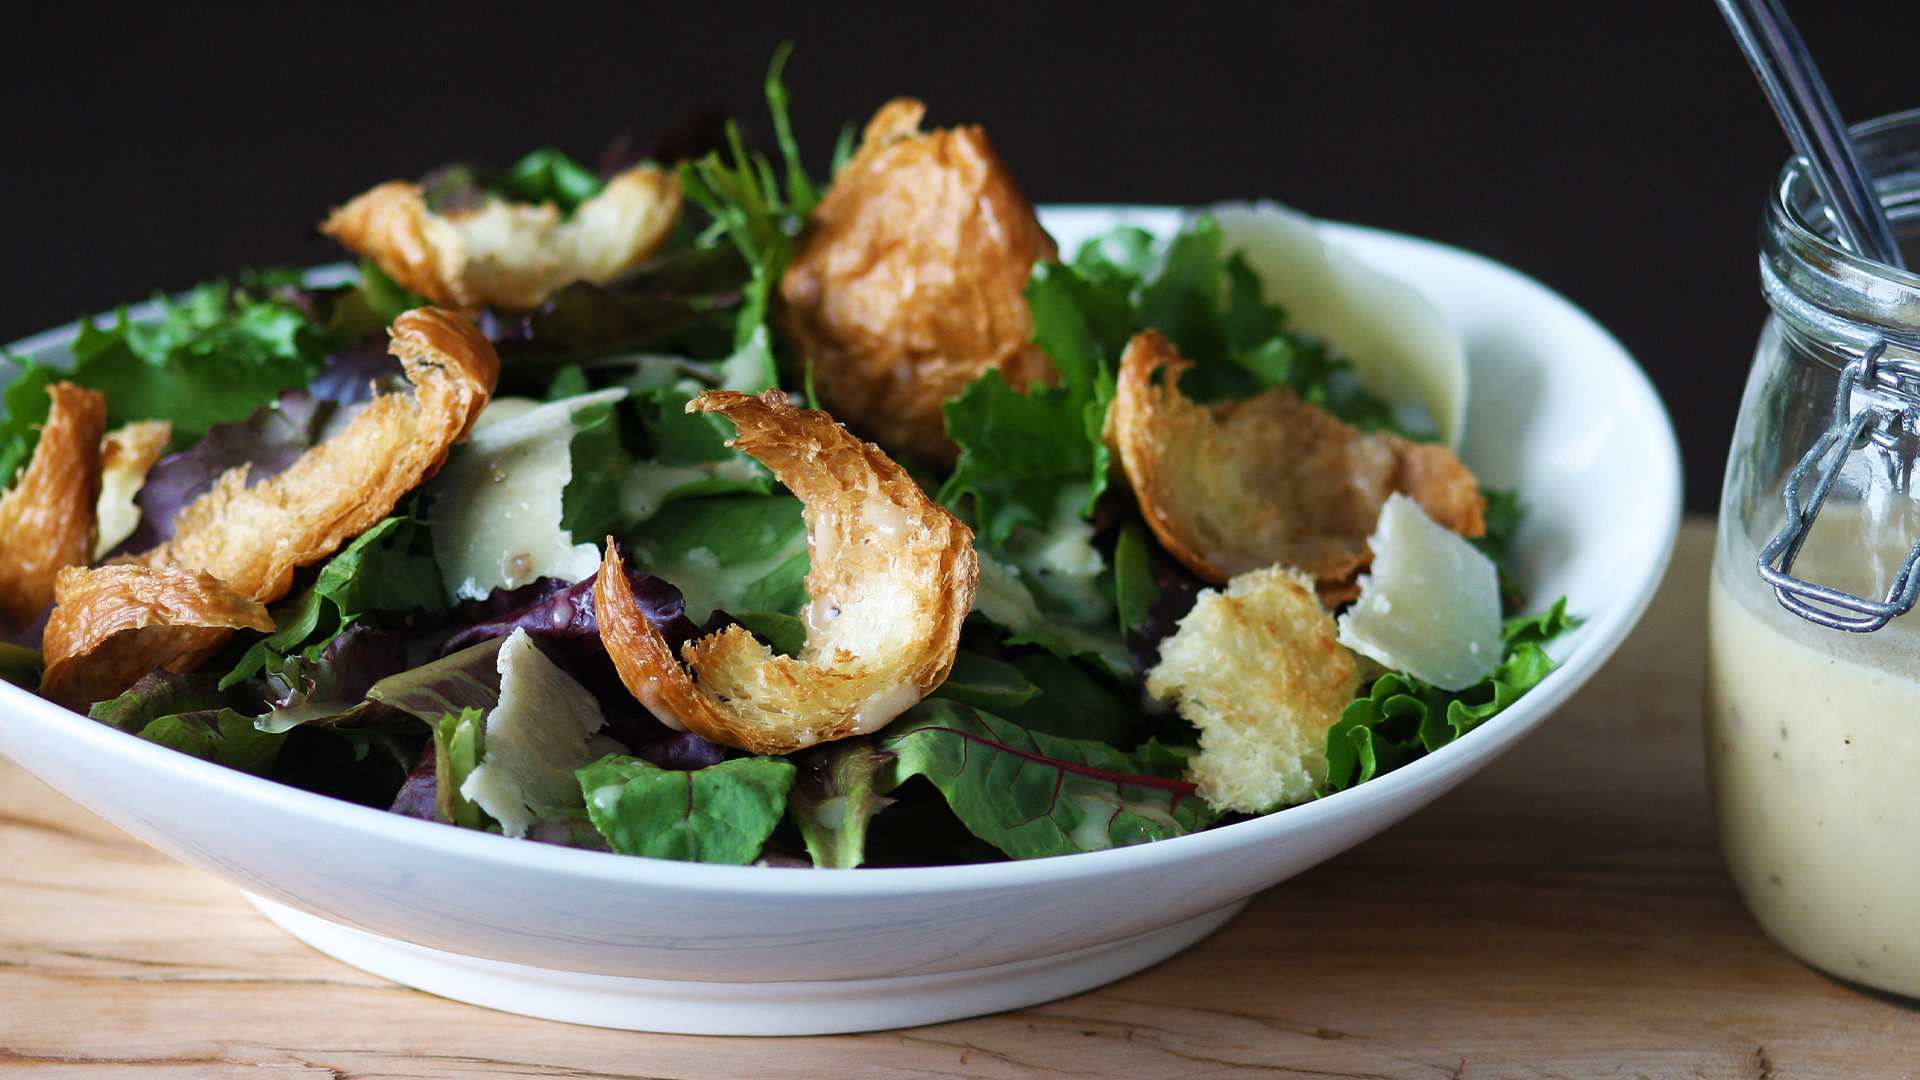 Spring Caesar salad with croissant croutons